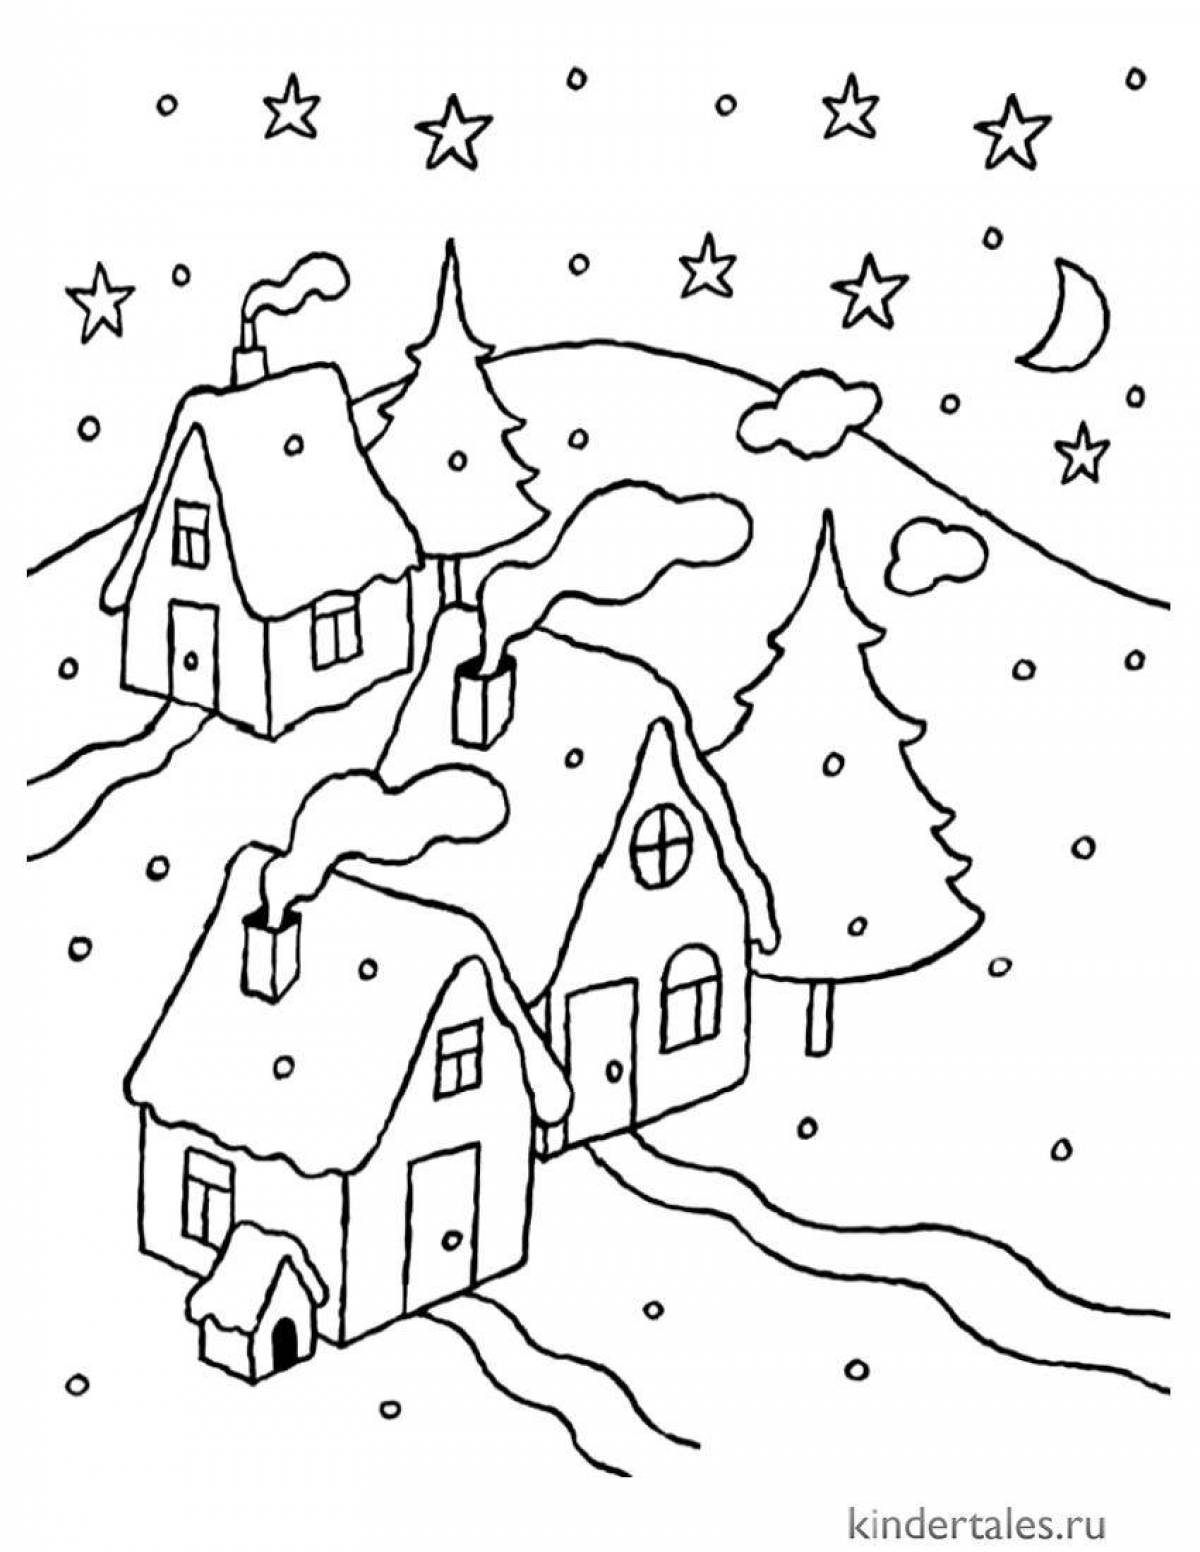 Glowing winter landscape coloring page grade 4